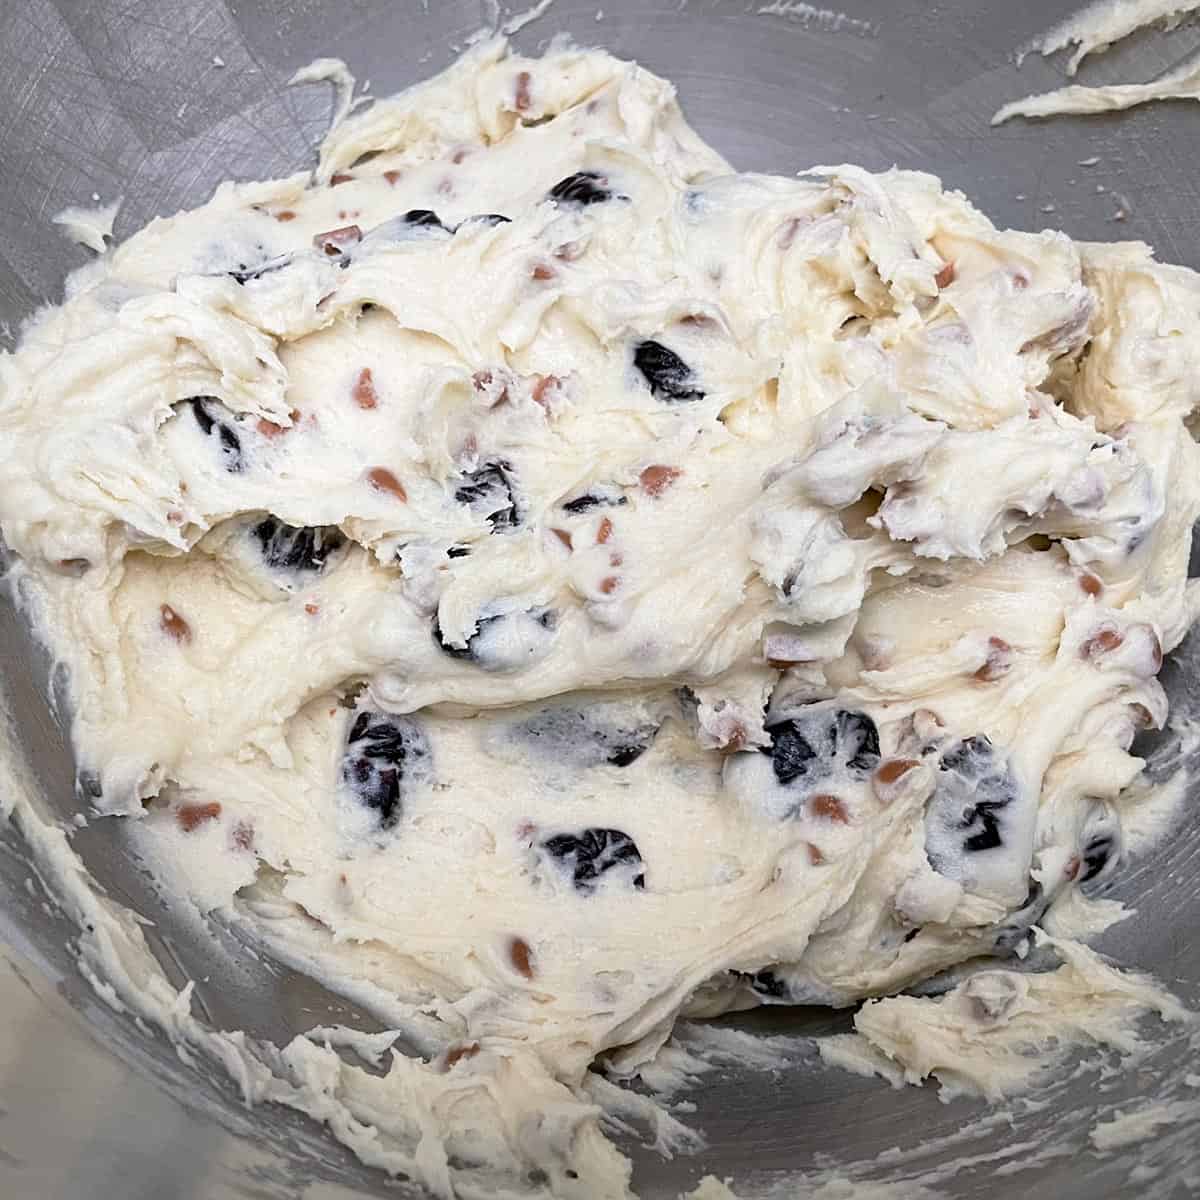 Completed mixed cookie dough and ready to be chilled before baking.